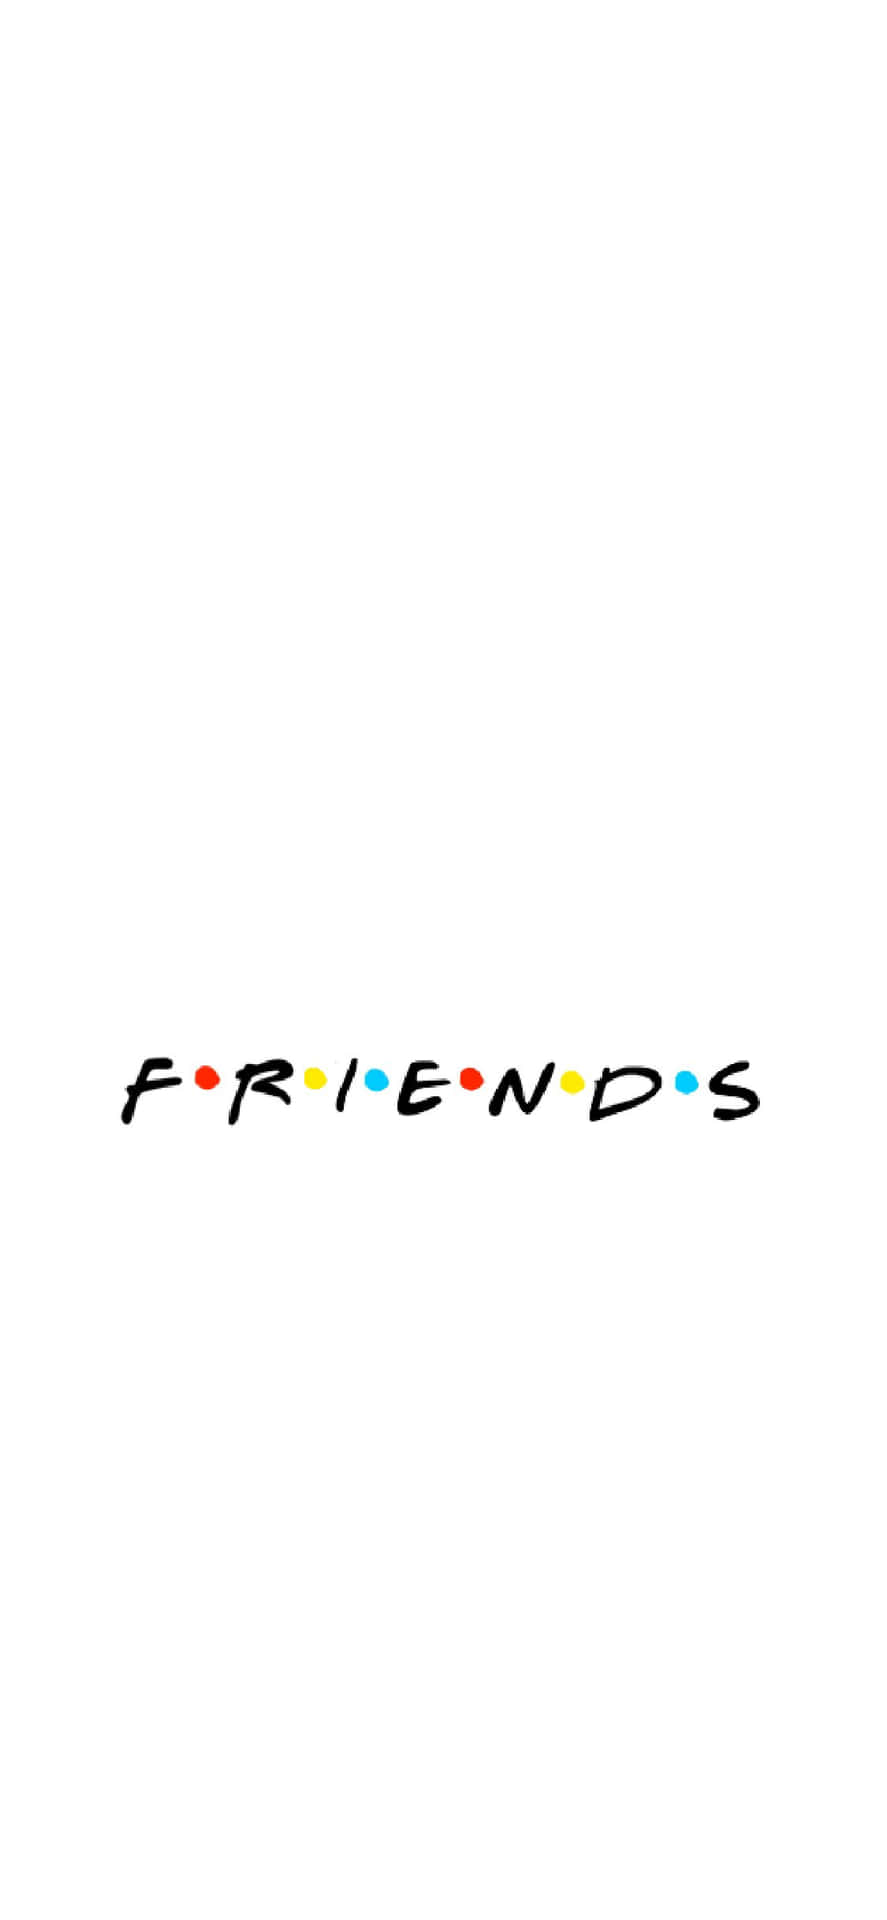 Free Best Friends Forever iPhone Wallpaper Downloads, Best Friends Forever iPhone Wallpaper for FREE